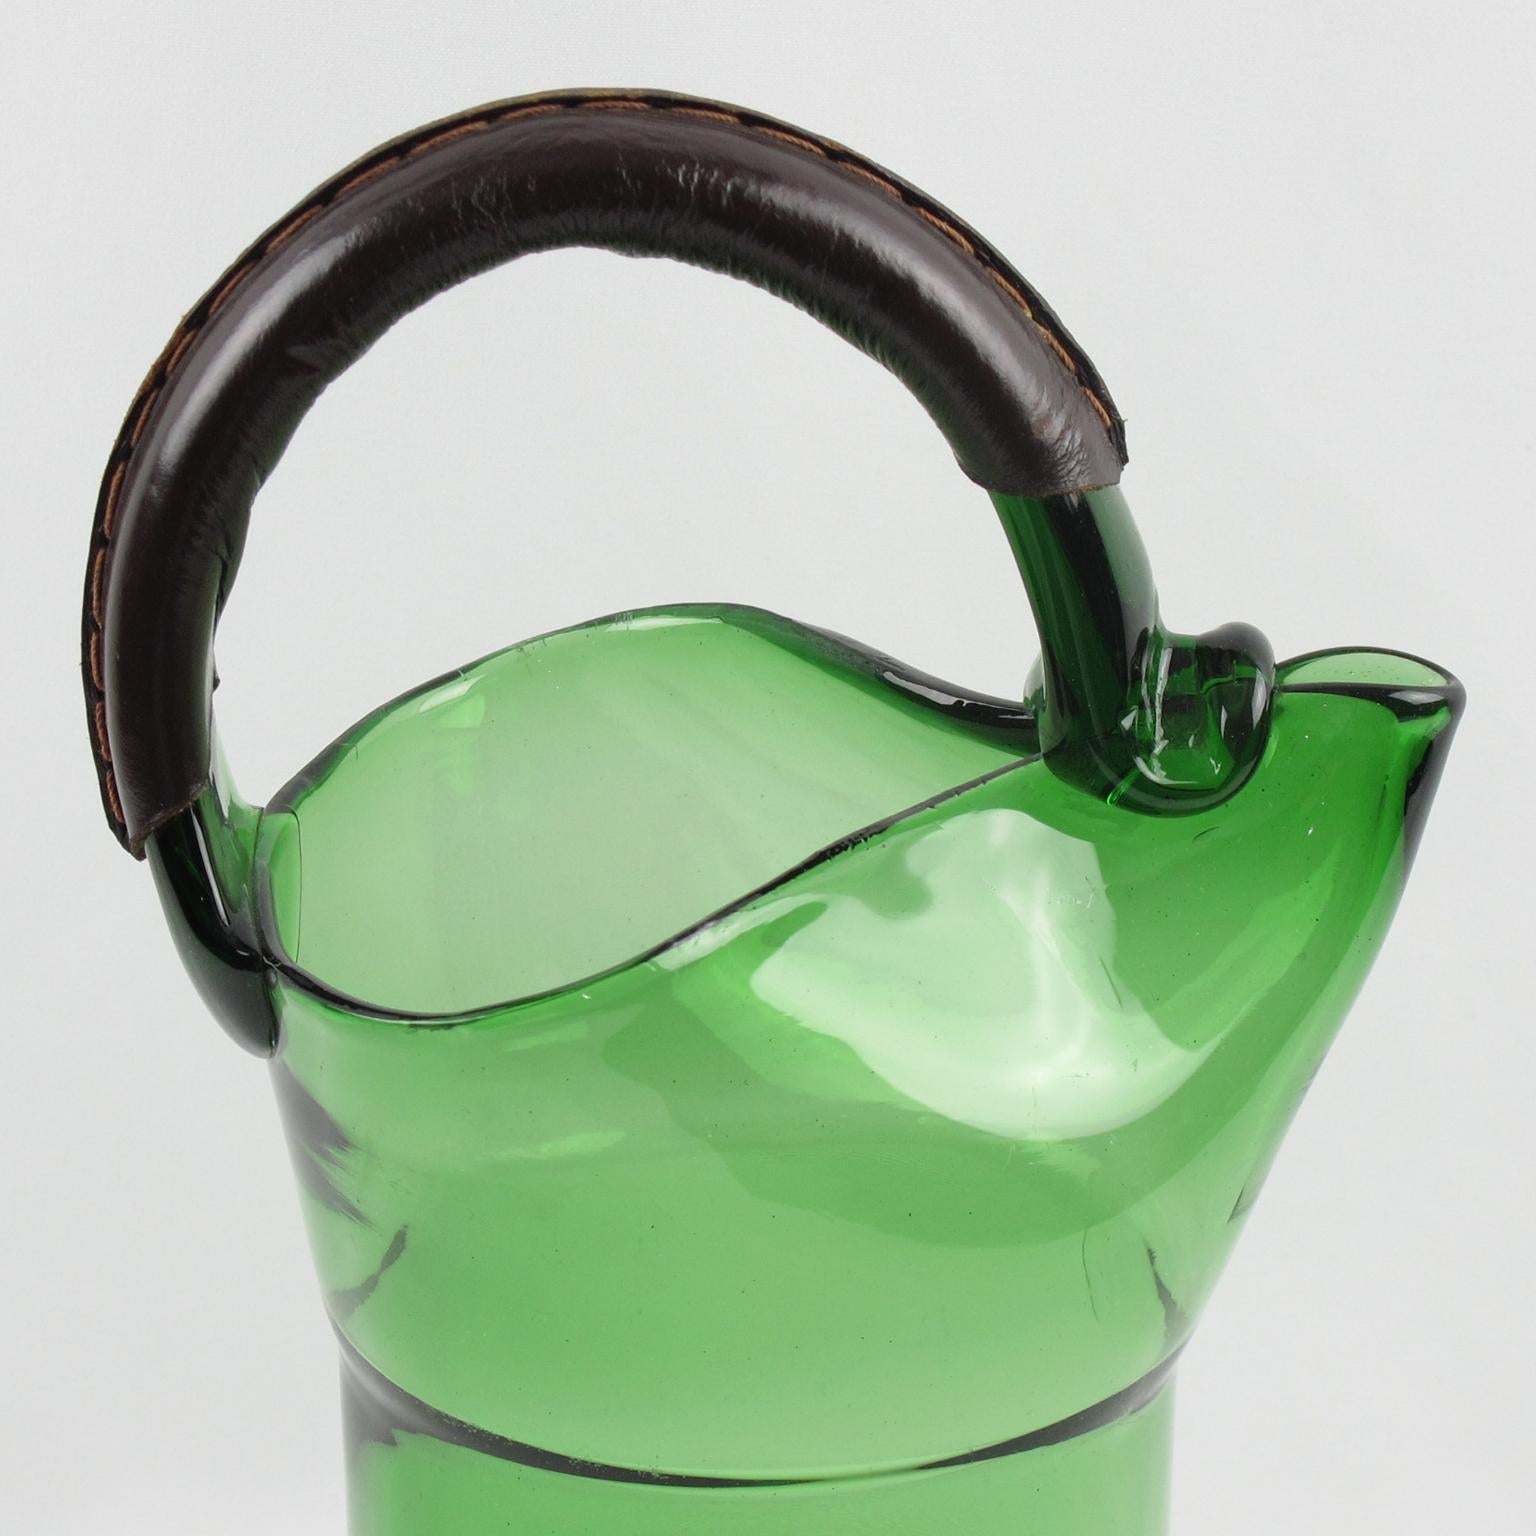 Italian Mouth-Blown Glass Barware Pitcher Handstitched Leather Handle 3